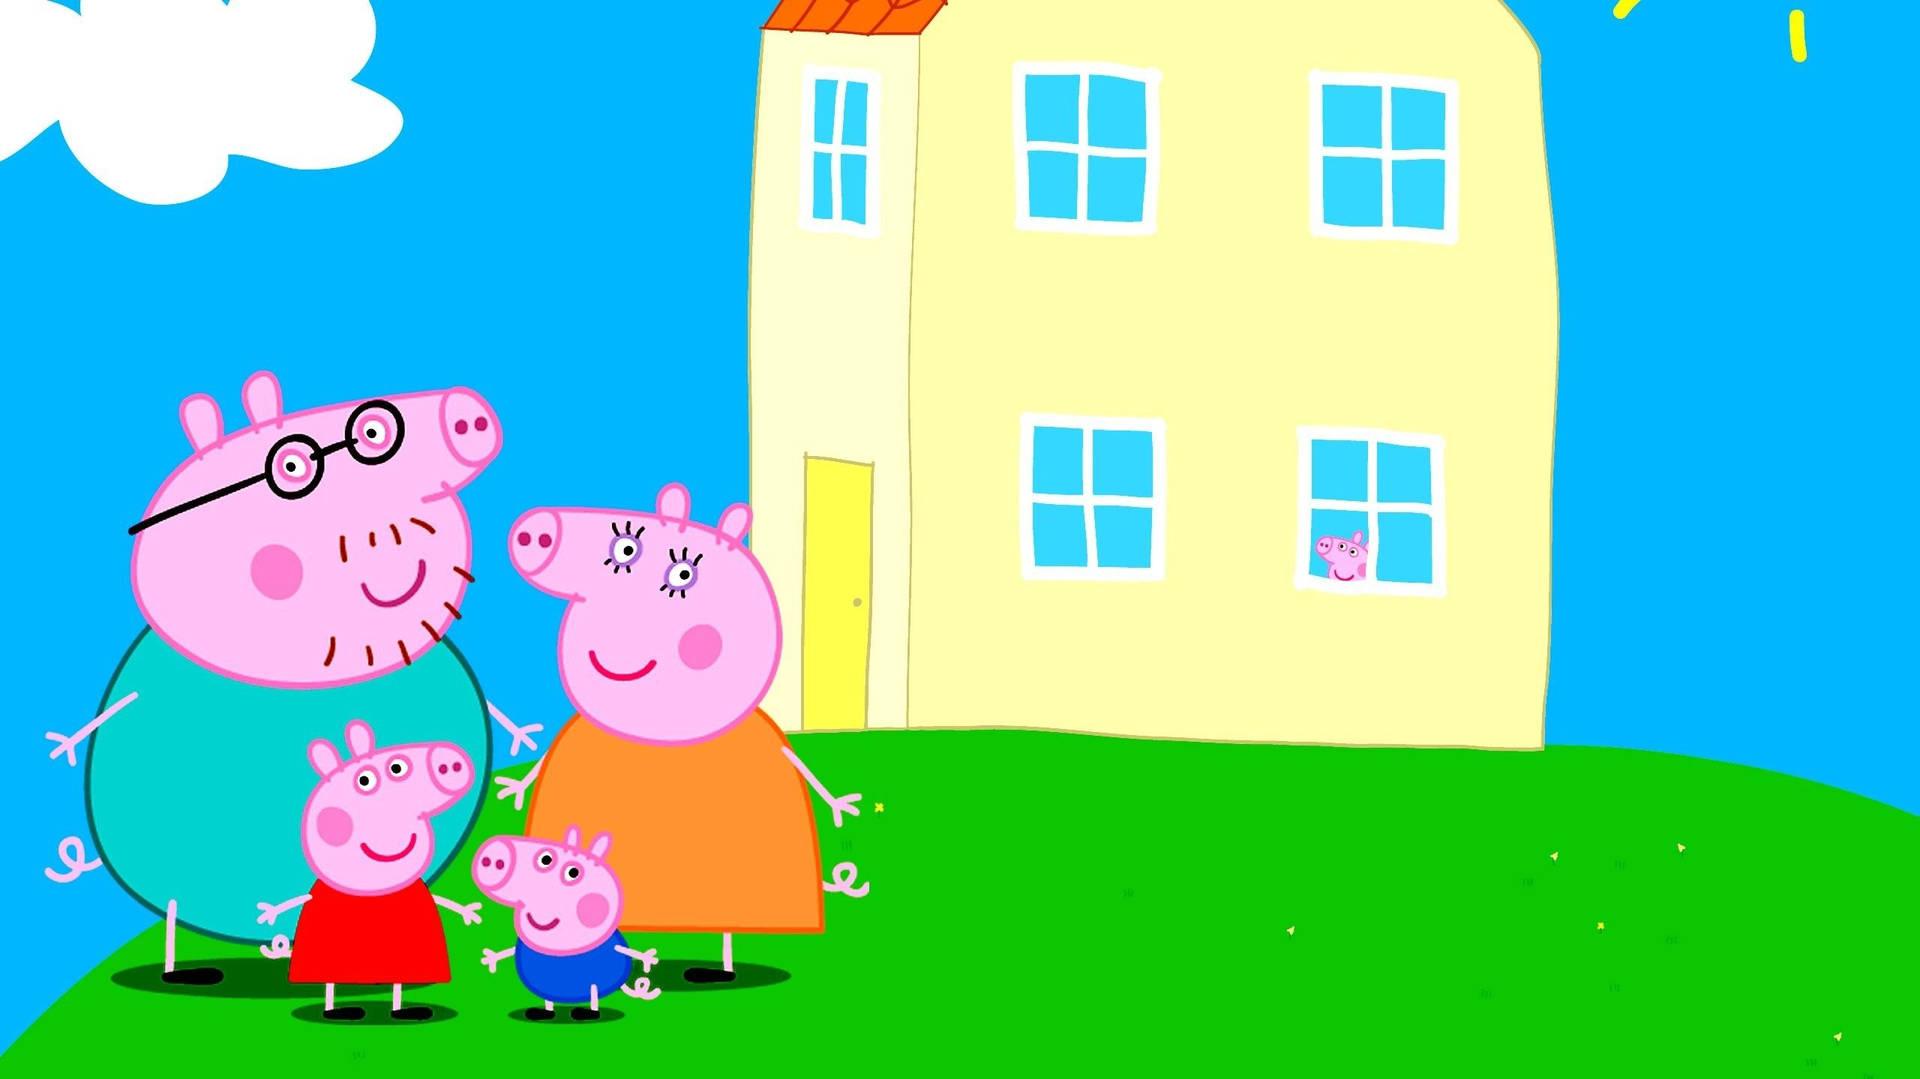 Wele To The Spooky Peppa Pig House Wallpaper